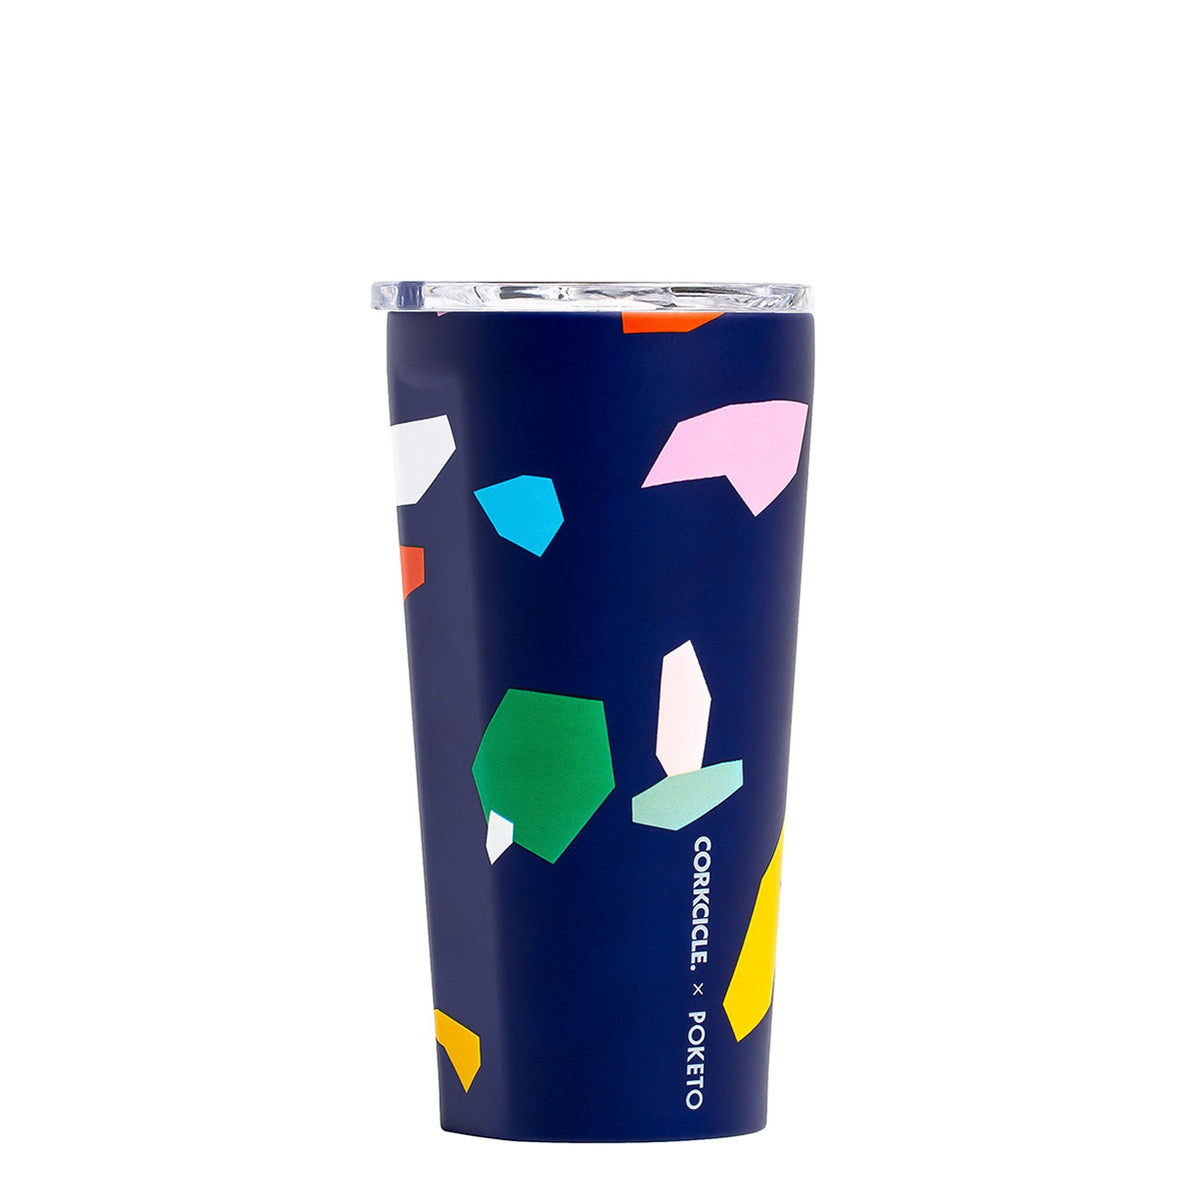 Corkcicle Poketo Tumbler 475ml - Confetti Insulated Stainless Steel Cup